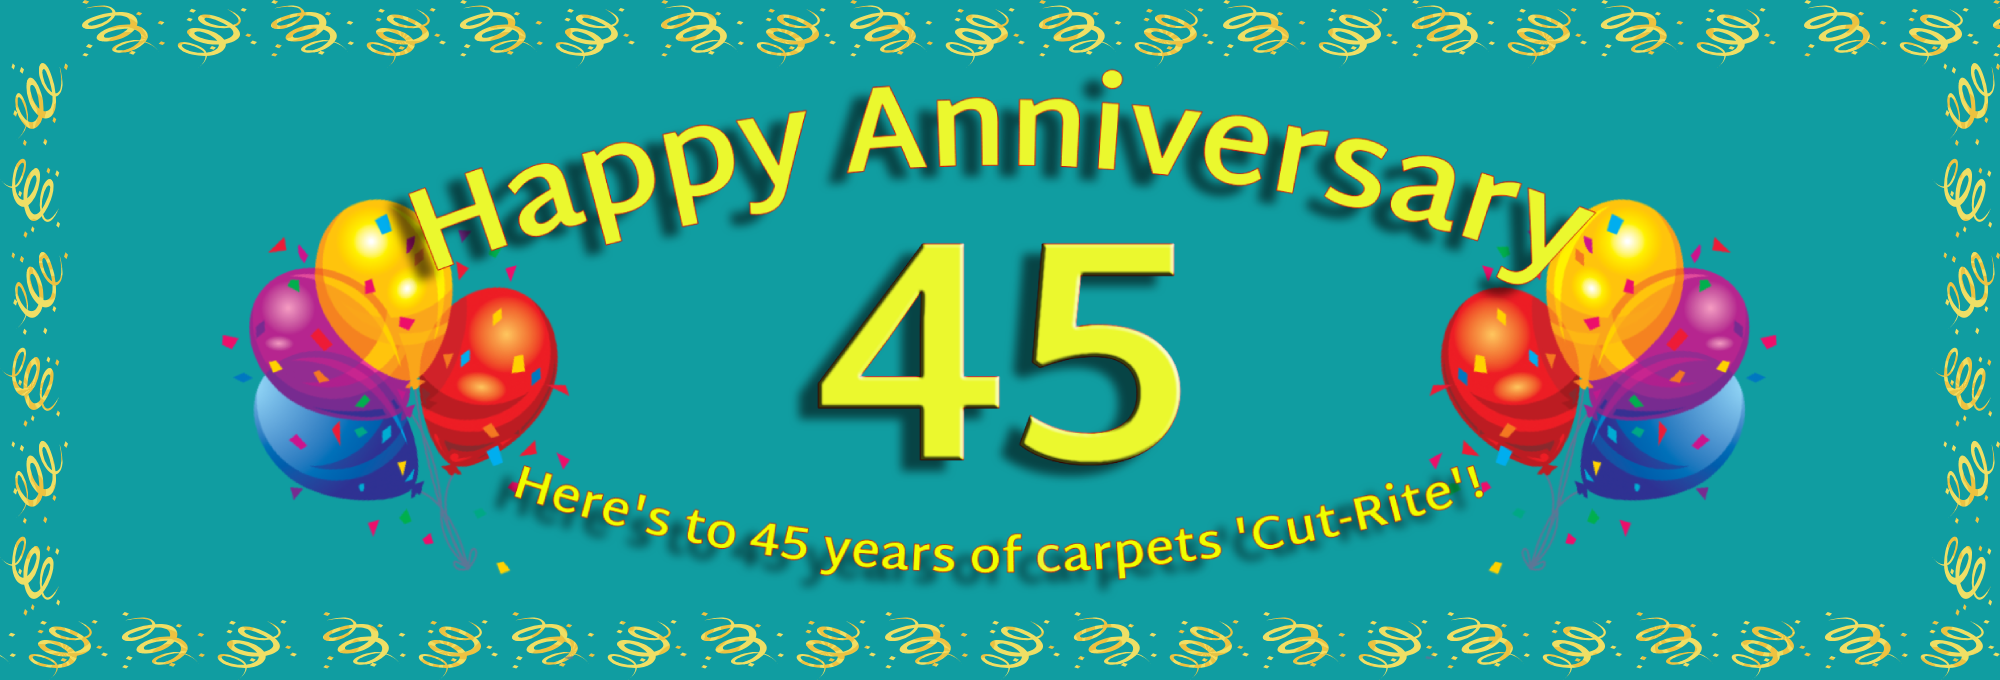 Celebrate 45 Years With Cut-Rite Carpets Anniversary Extravaganza